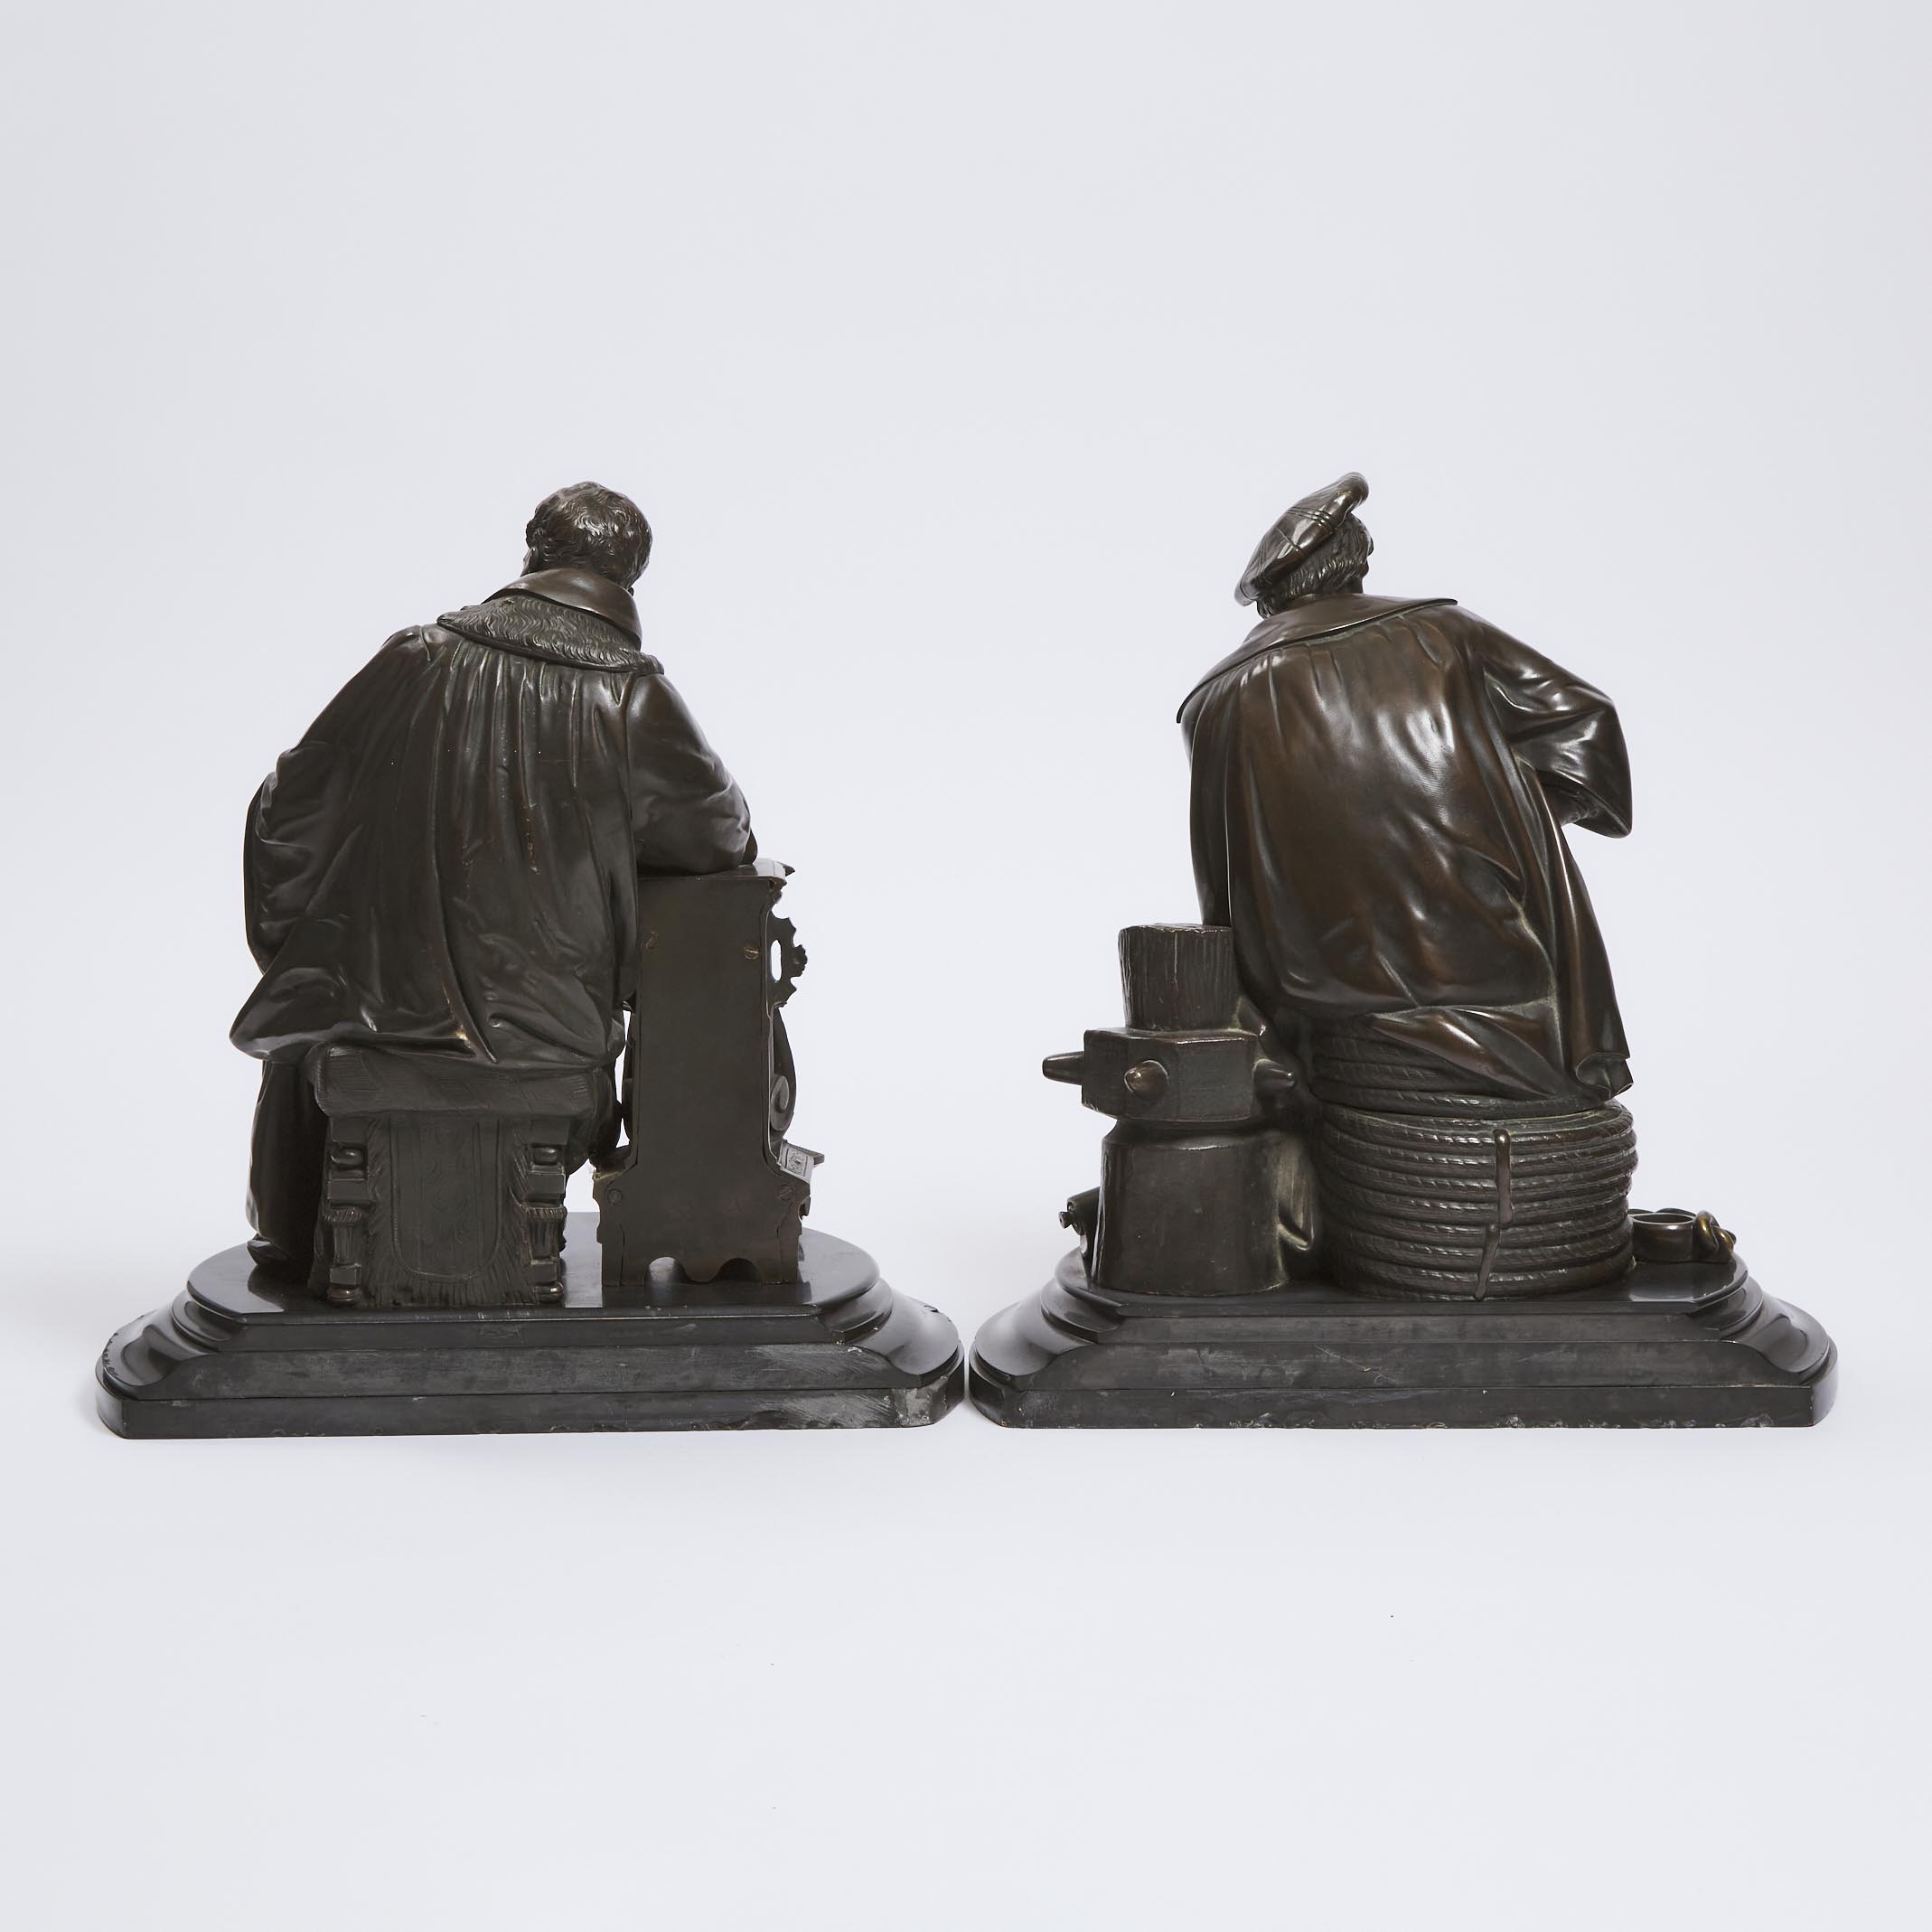 Large Pair of French School Patinated Bronze FIgures of Galileo and John Cabot, 19th century